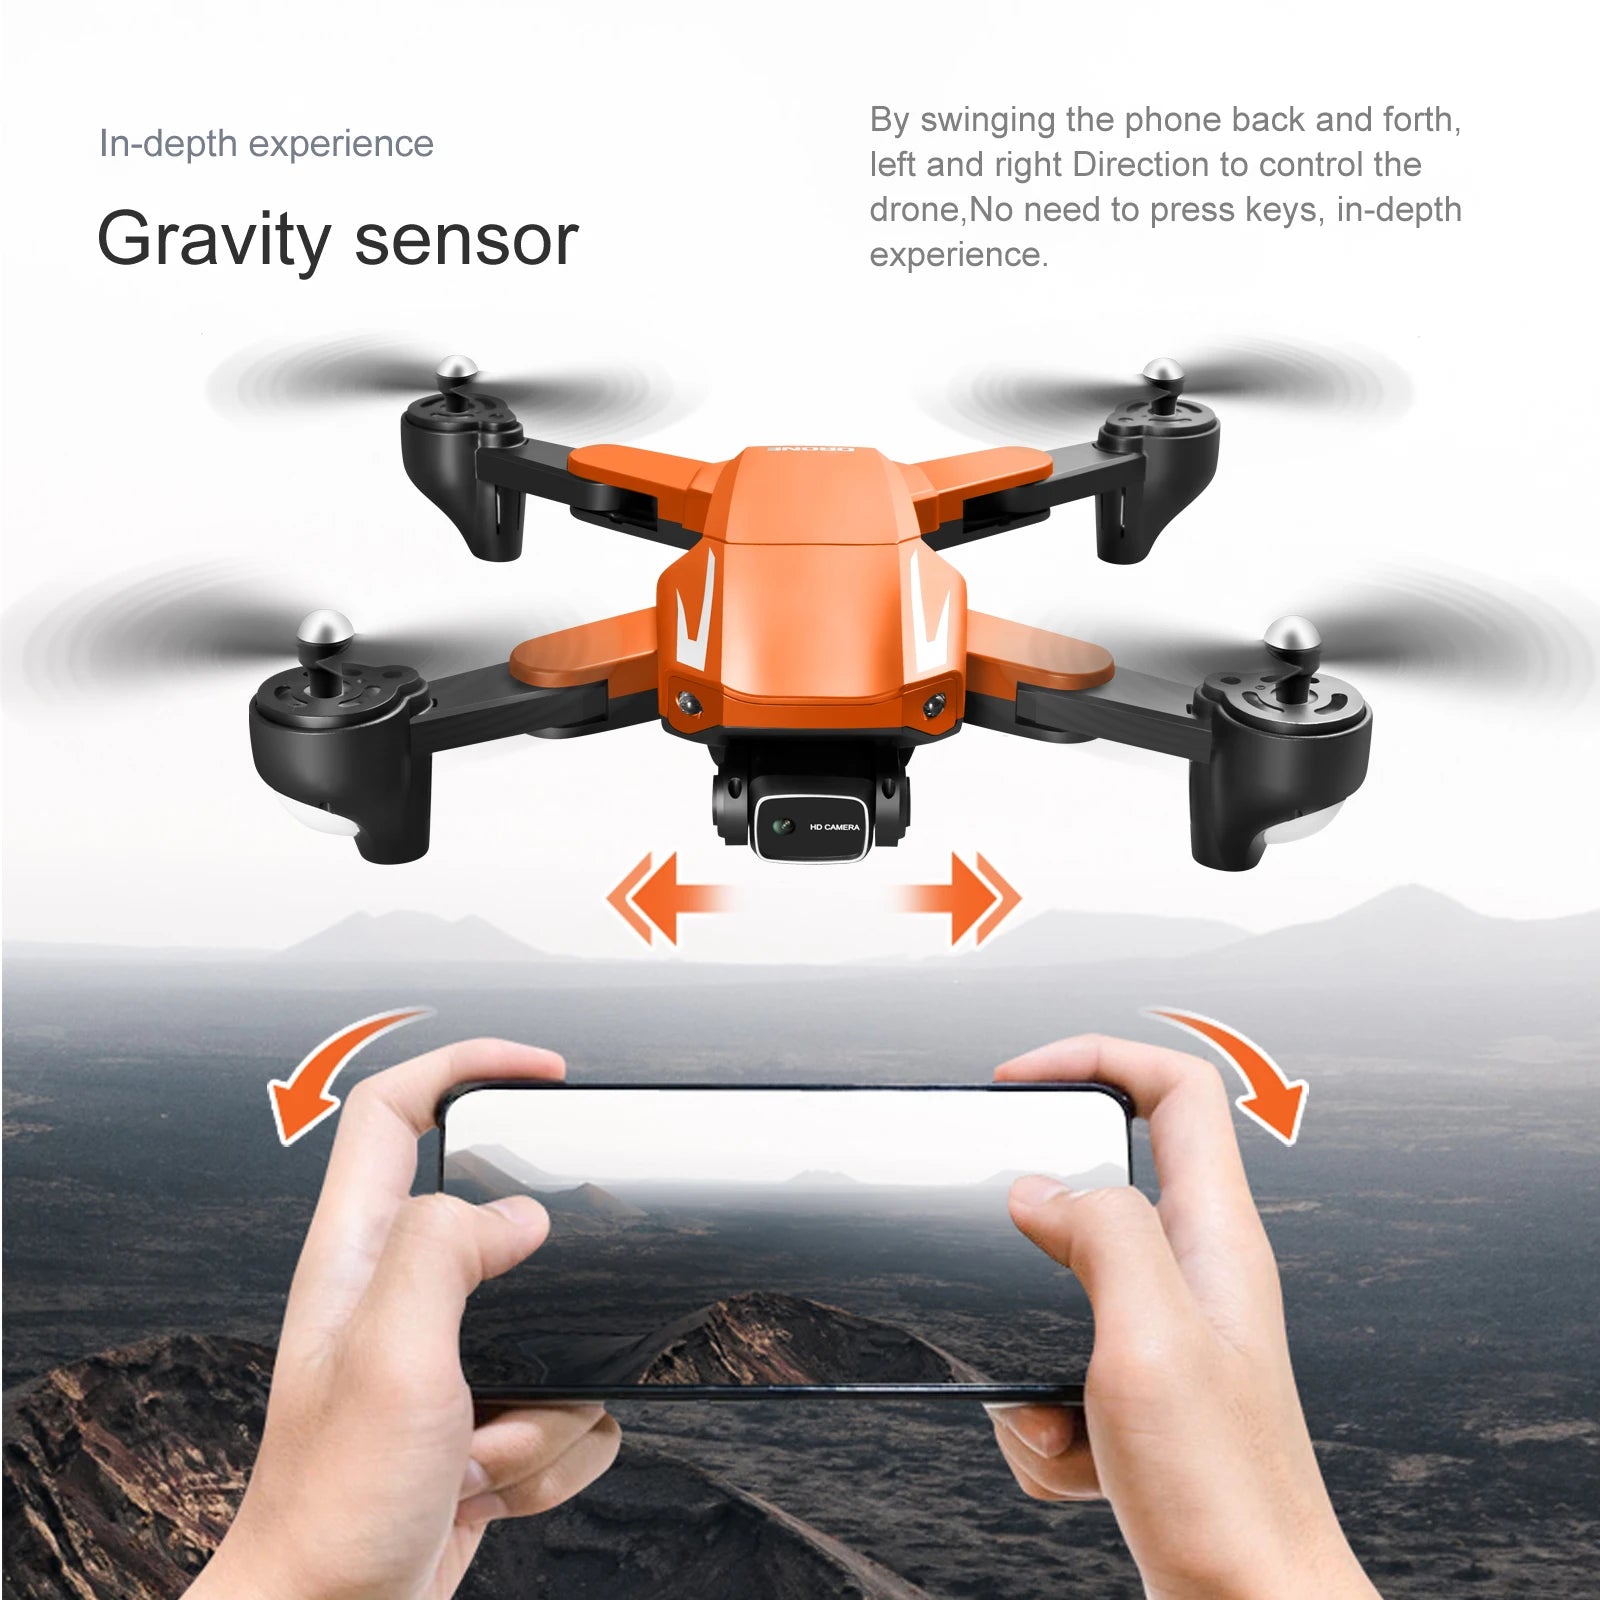 S93 Drone, hdcnr drone has in-depth experience left and